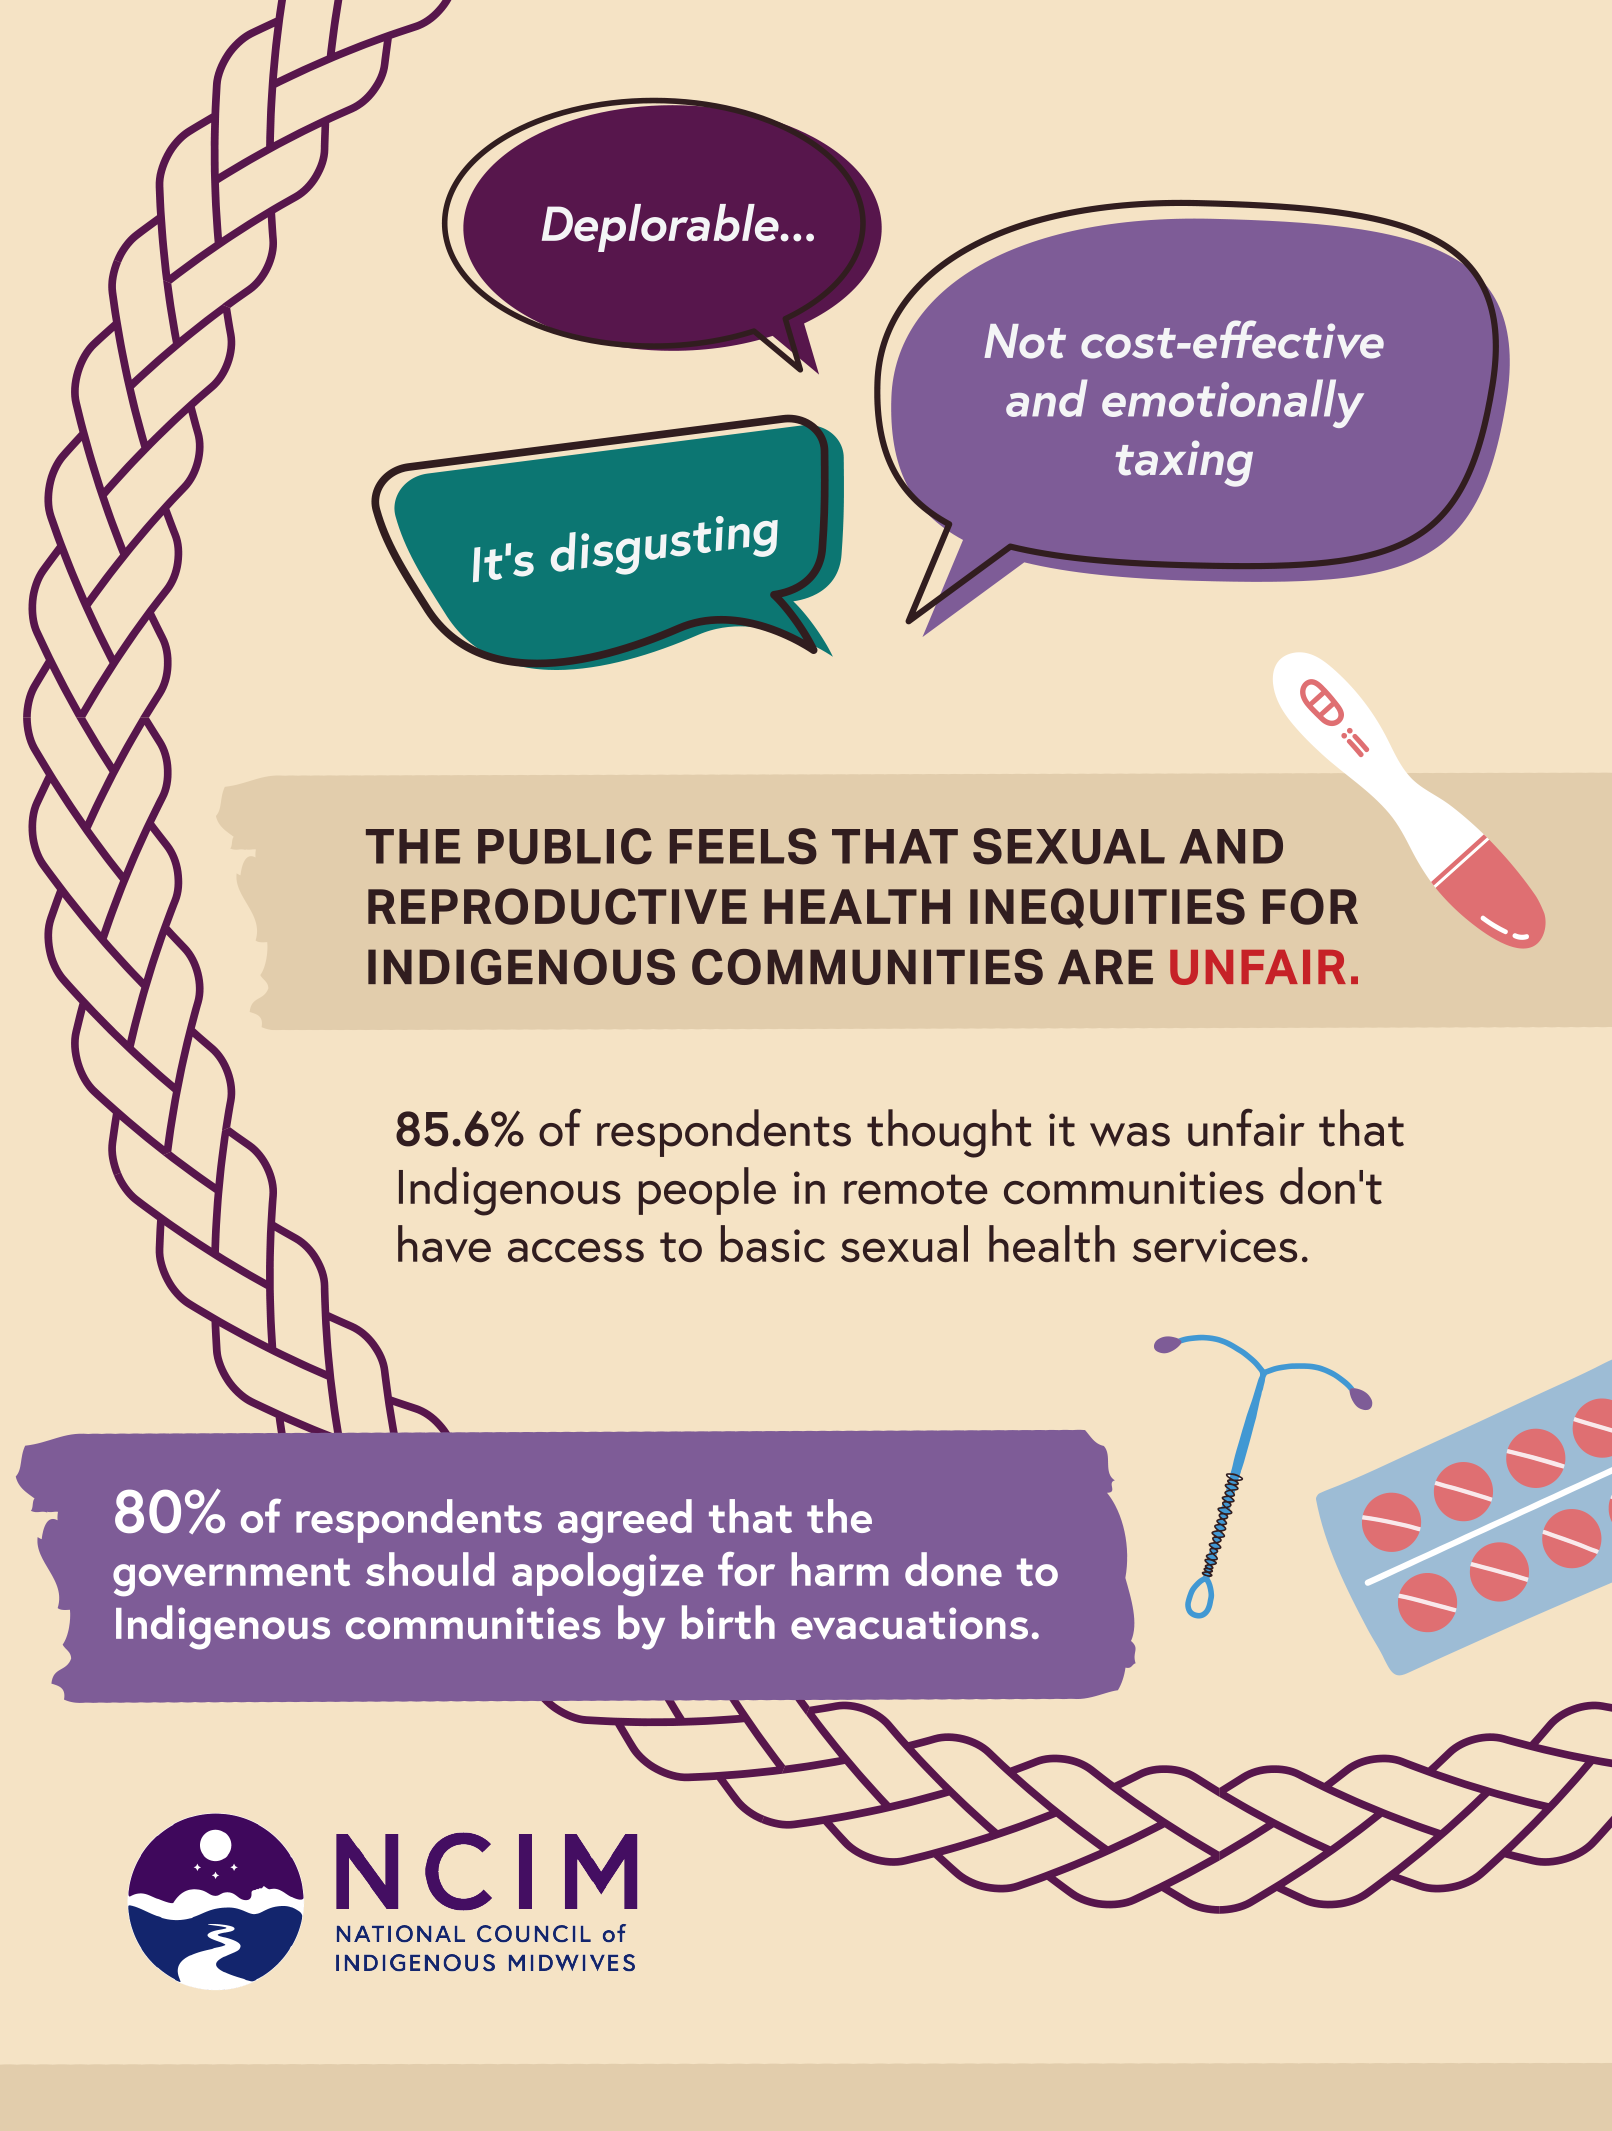 A beige background with purple and teal elements highlighting results from the national poll. Speech bubbles highlight participant responses: Deplorable.., It's disgusting, Not cost-effective and emotionally taxing. Below, text reads: The public feels that sexual and reproductive health inequities for Indigenous communities are unfair. 85.6% of respondents thought it was unfair that Indigenous people in remote communities don't have access to basic sexual health services. 80% of respondents agreed that the government should apologize for harm done to Indigenous communities by birth evacuations.